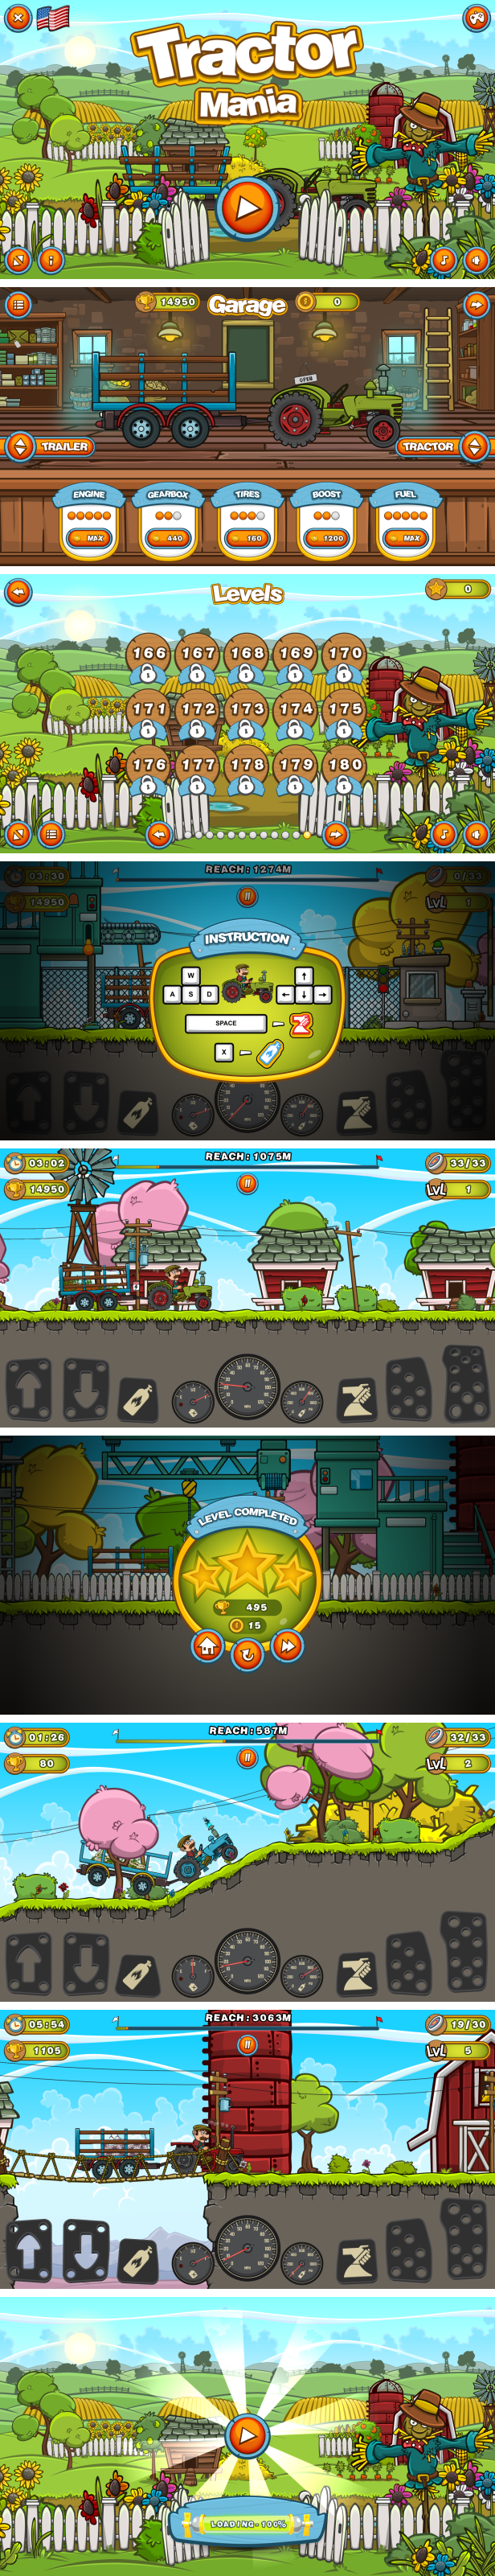 Tractor Mania - HTML5 Game + Mobile Version! (Construct 3 | Construct 2 | Capx) - 3